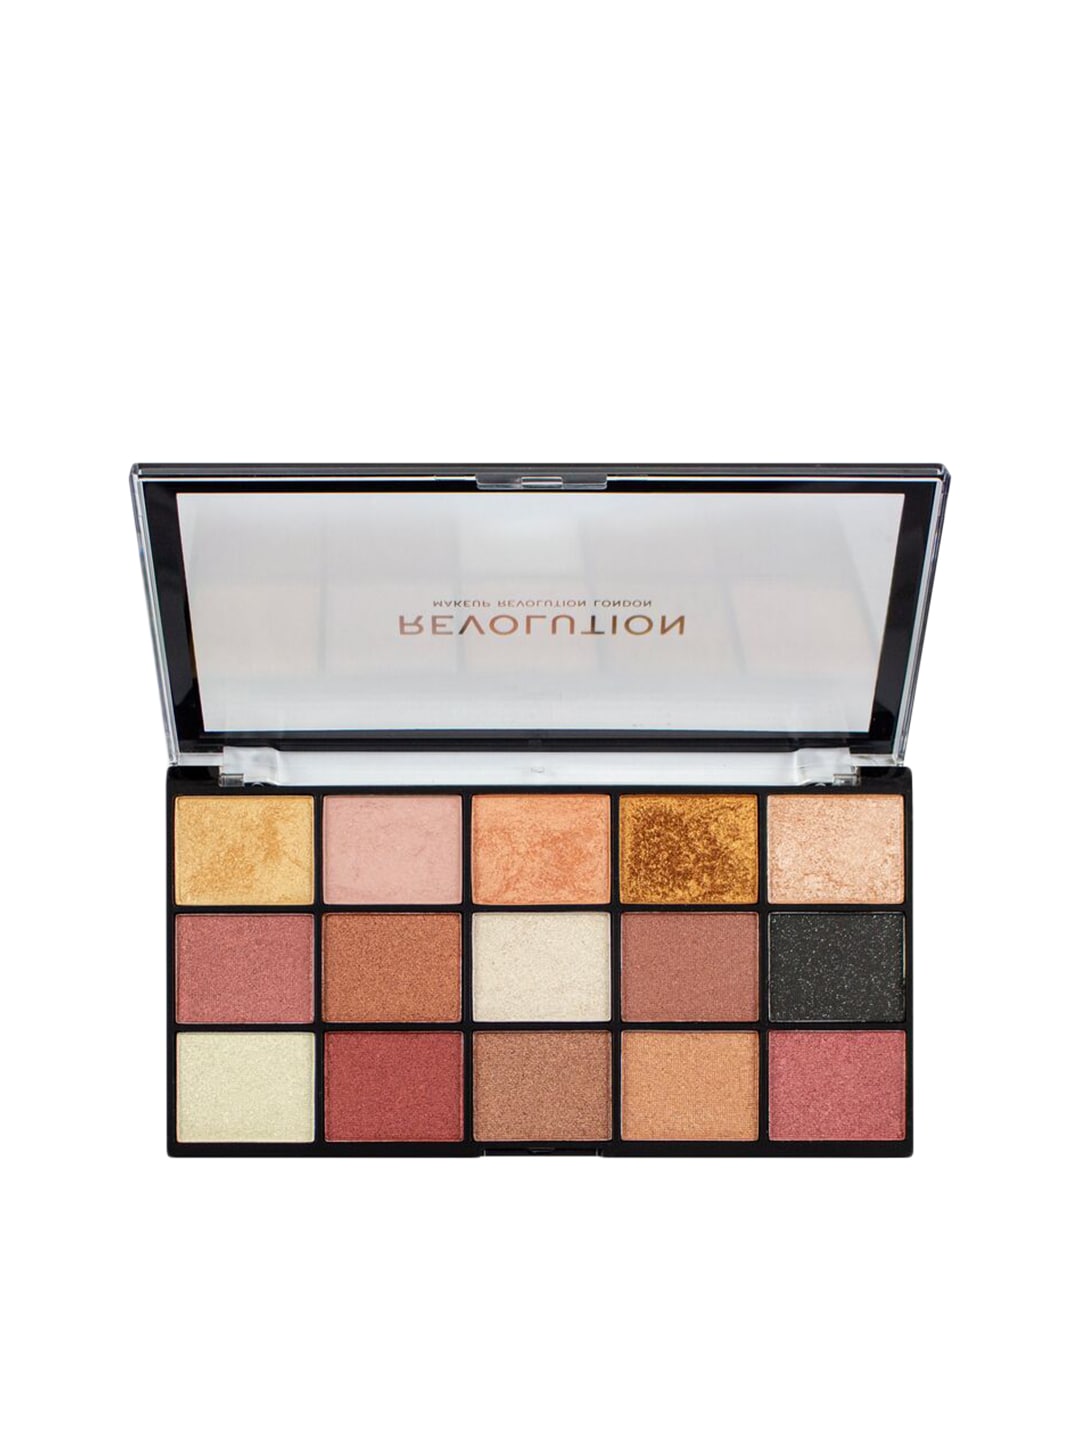 Makeup Revolution London Reloaded Eyeshadow Palette - Affection Price in  India, Full Specifications & Offers 